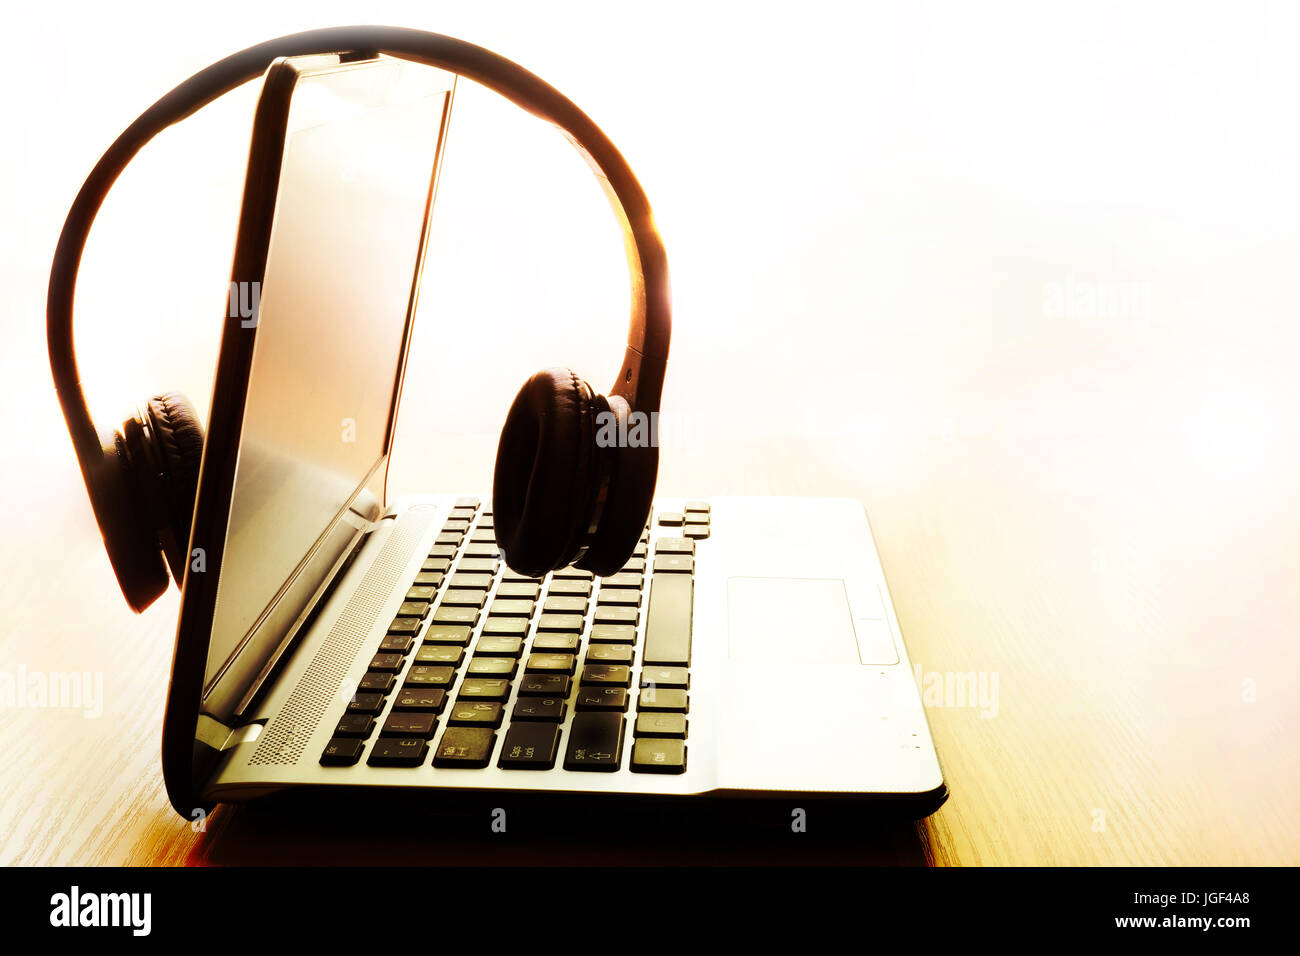 Laptop and wireless headphones. Relax or outsourcing work concept. Stock Photo